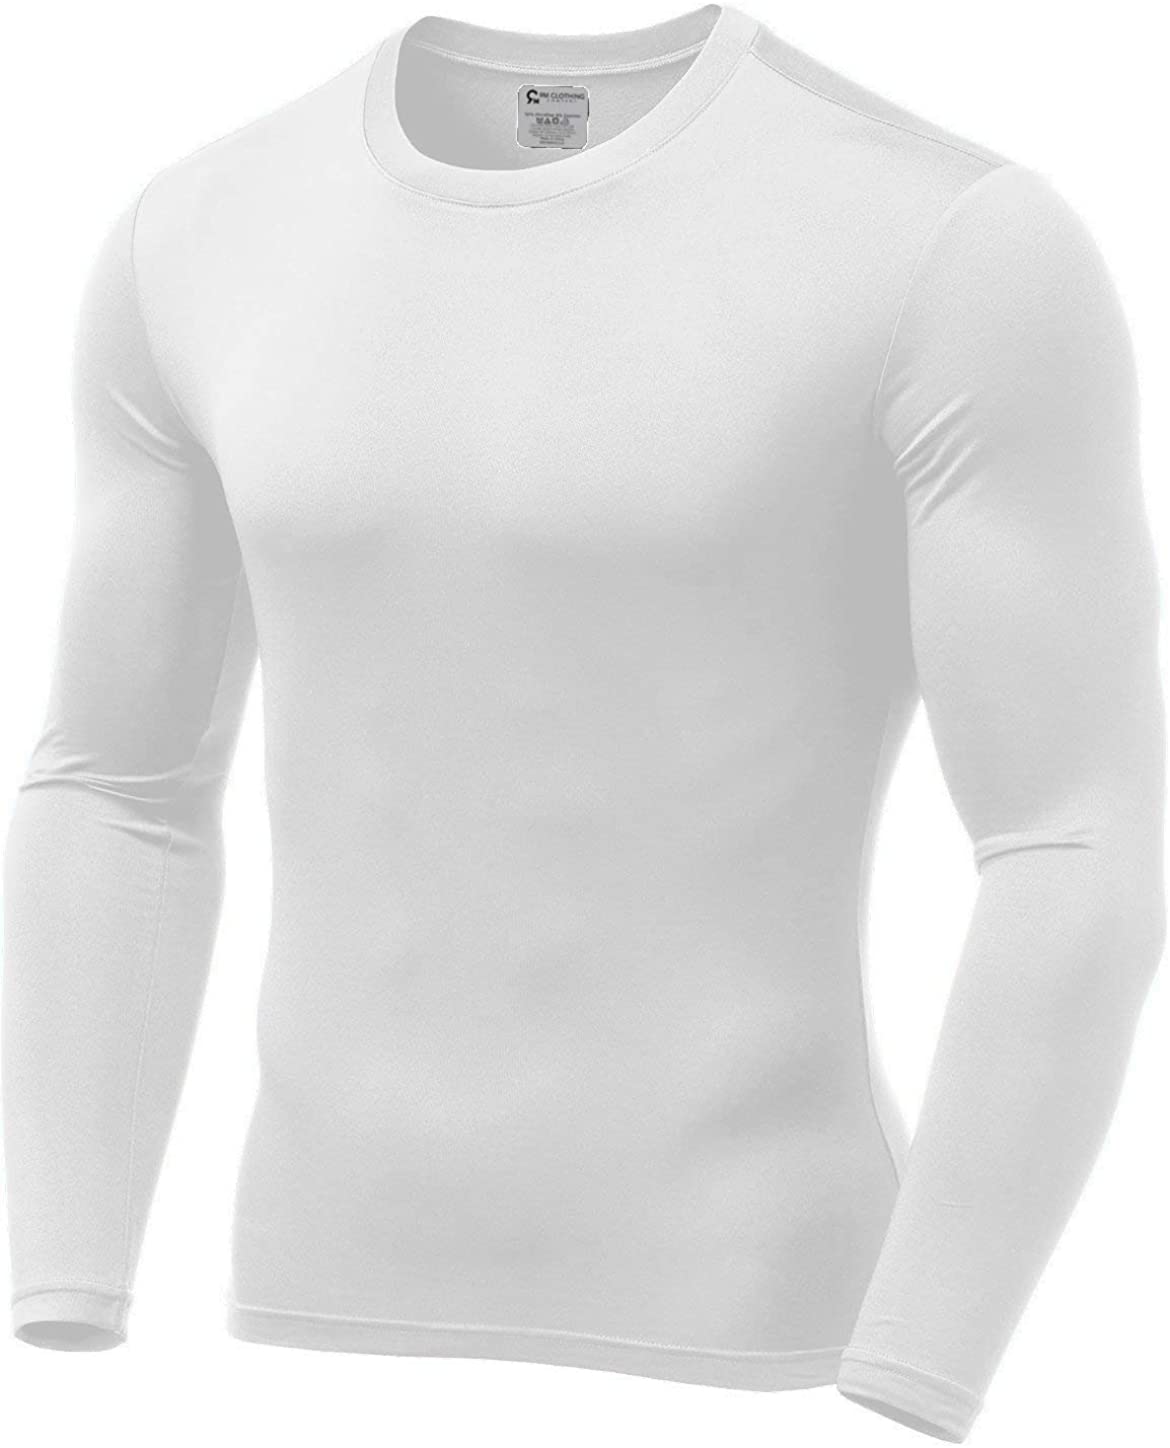 9M Mens Ultra Soft Thermal Shirt Compression Baselayer Crew Neck Top Fleece Lined Long Sleeve Underwear 